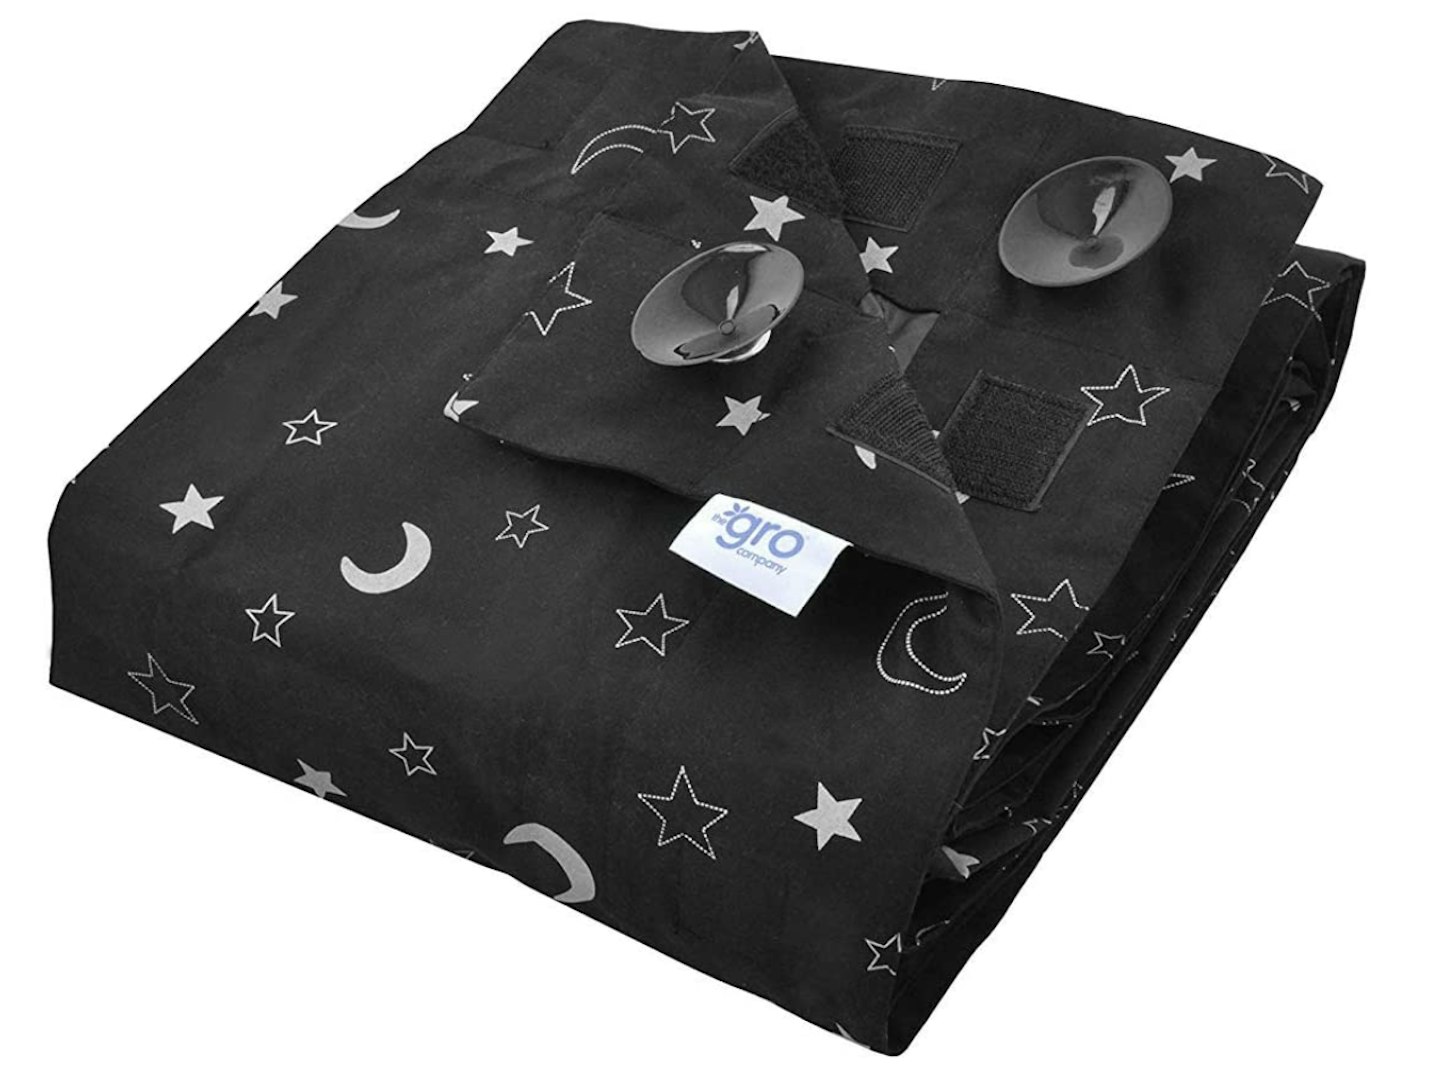 The Gro Company Stars and Moons Gro Anywhere Portable Blackout Blind